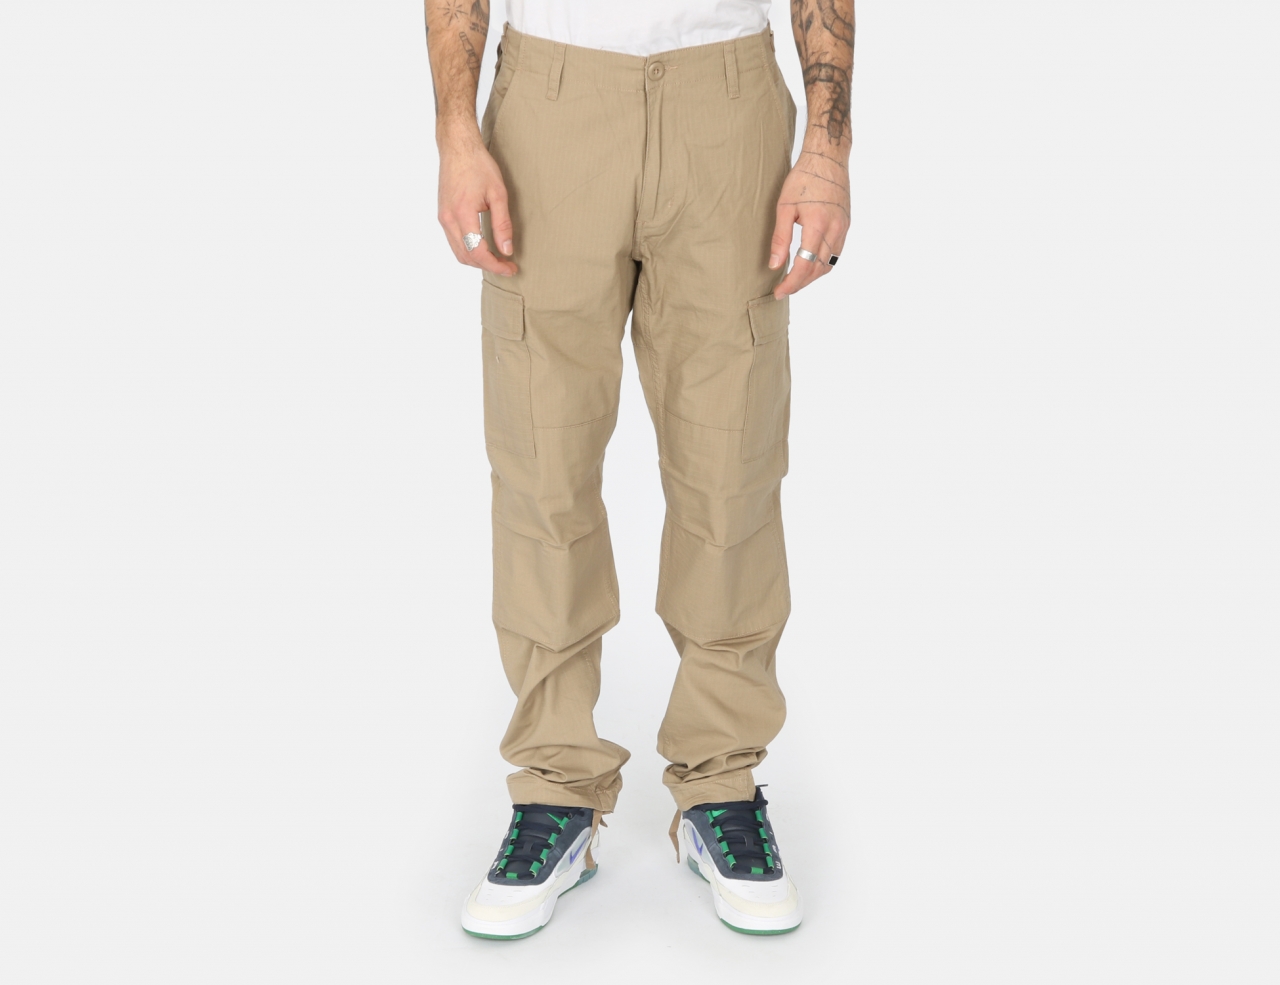 Carhartt WIP Aviation Pant - Leather Rinsed